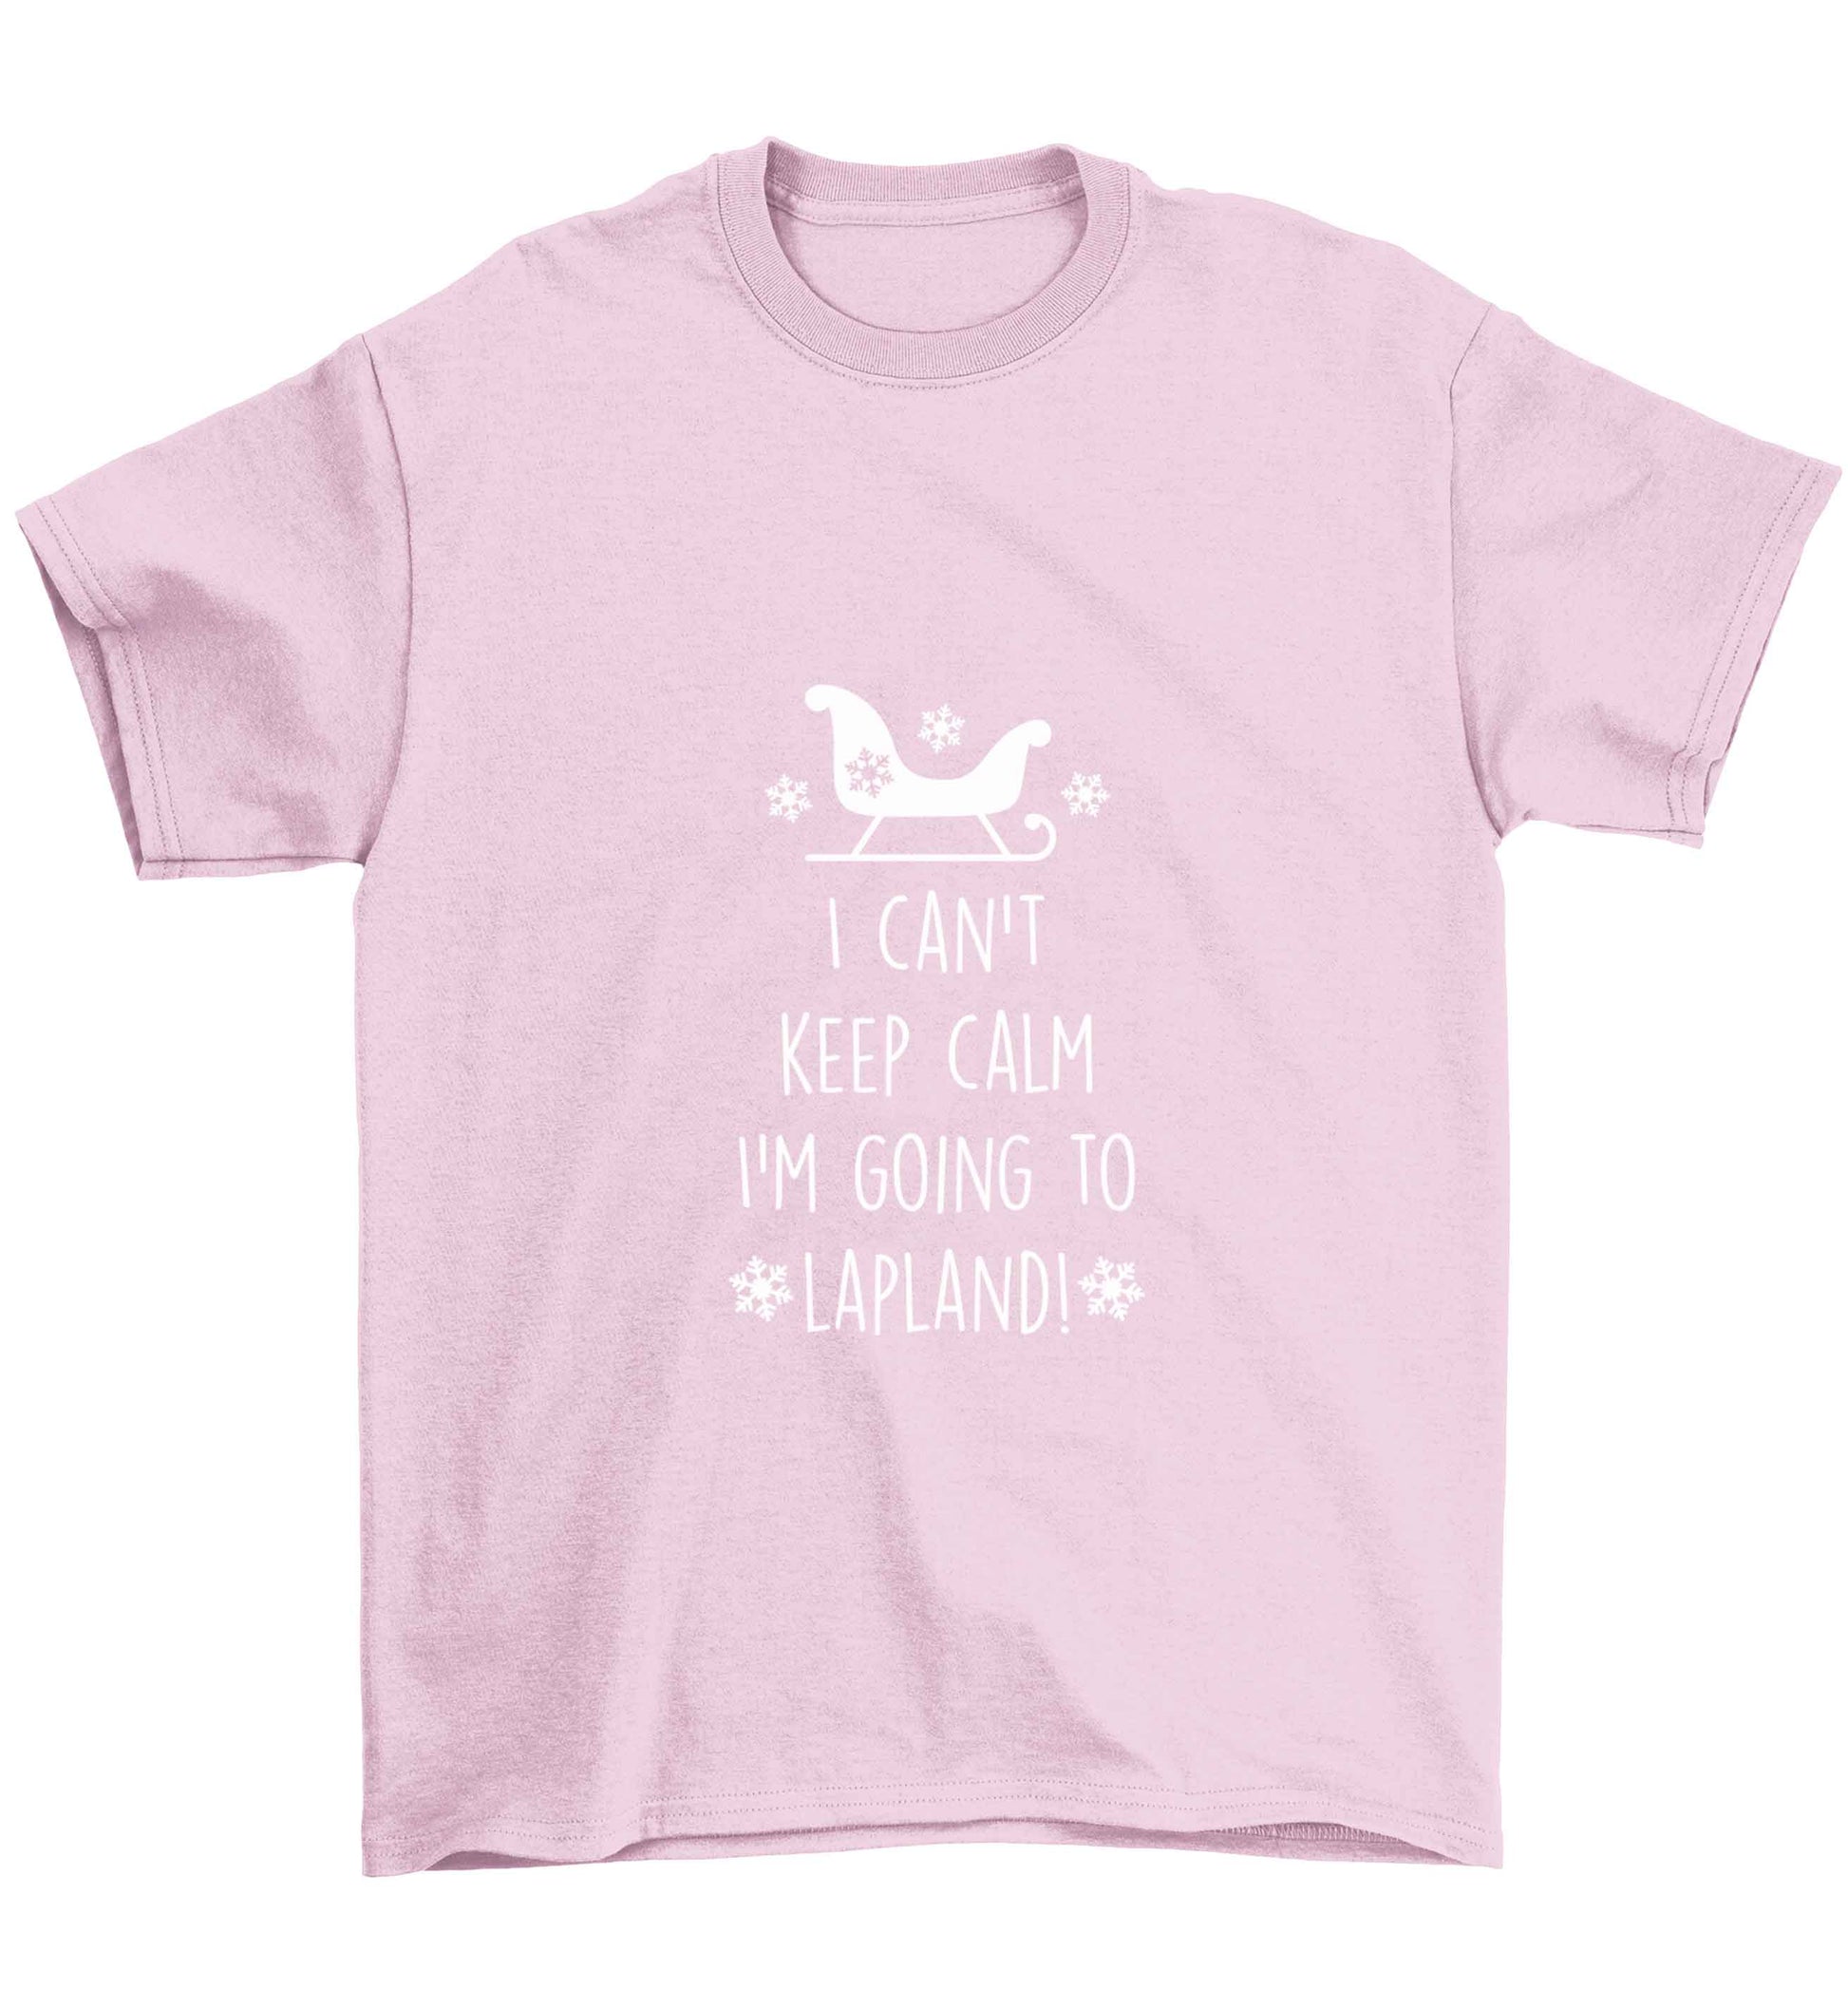 I can't keep calm I'm going to Lapland Children's light pink Tshirt 12-13 Years